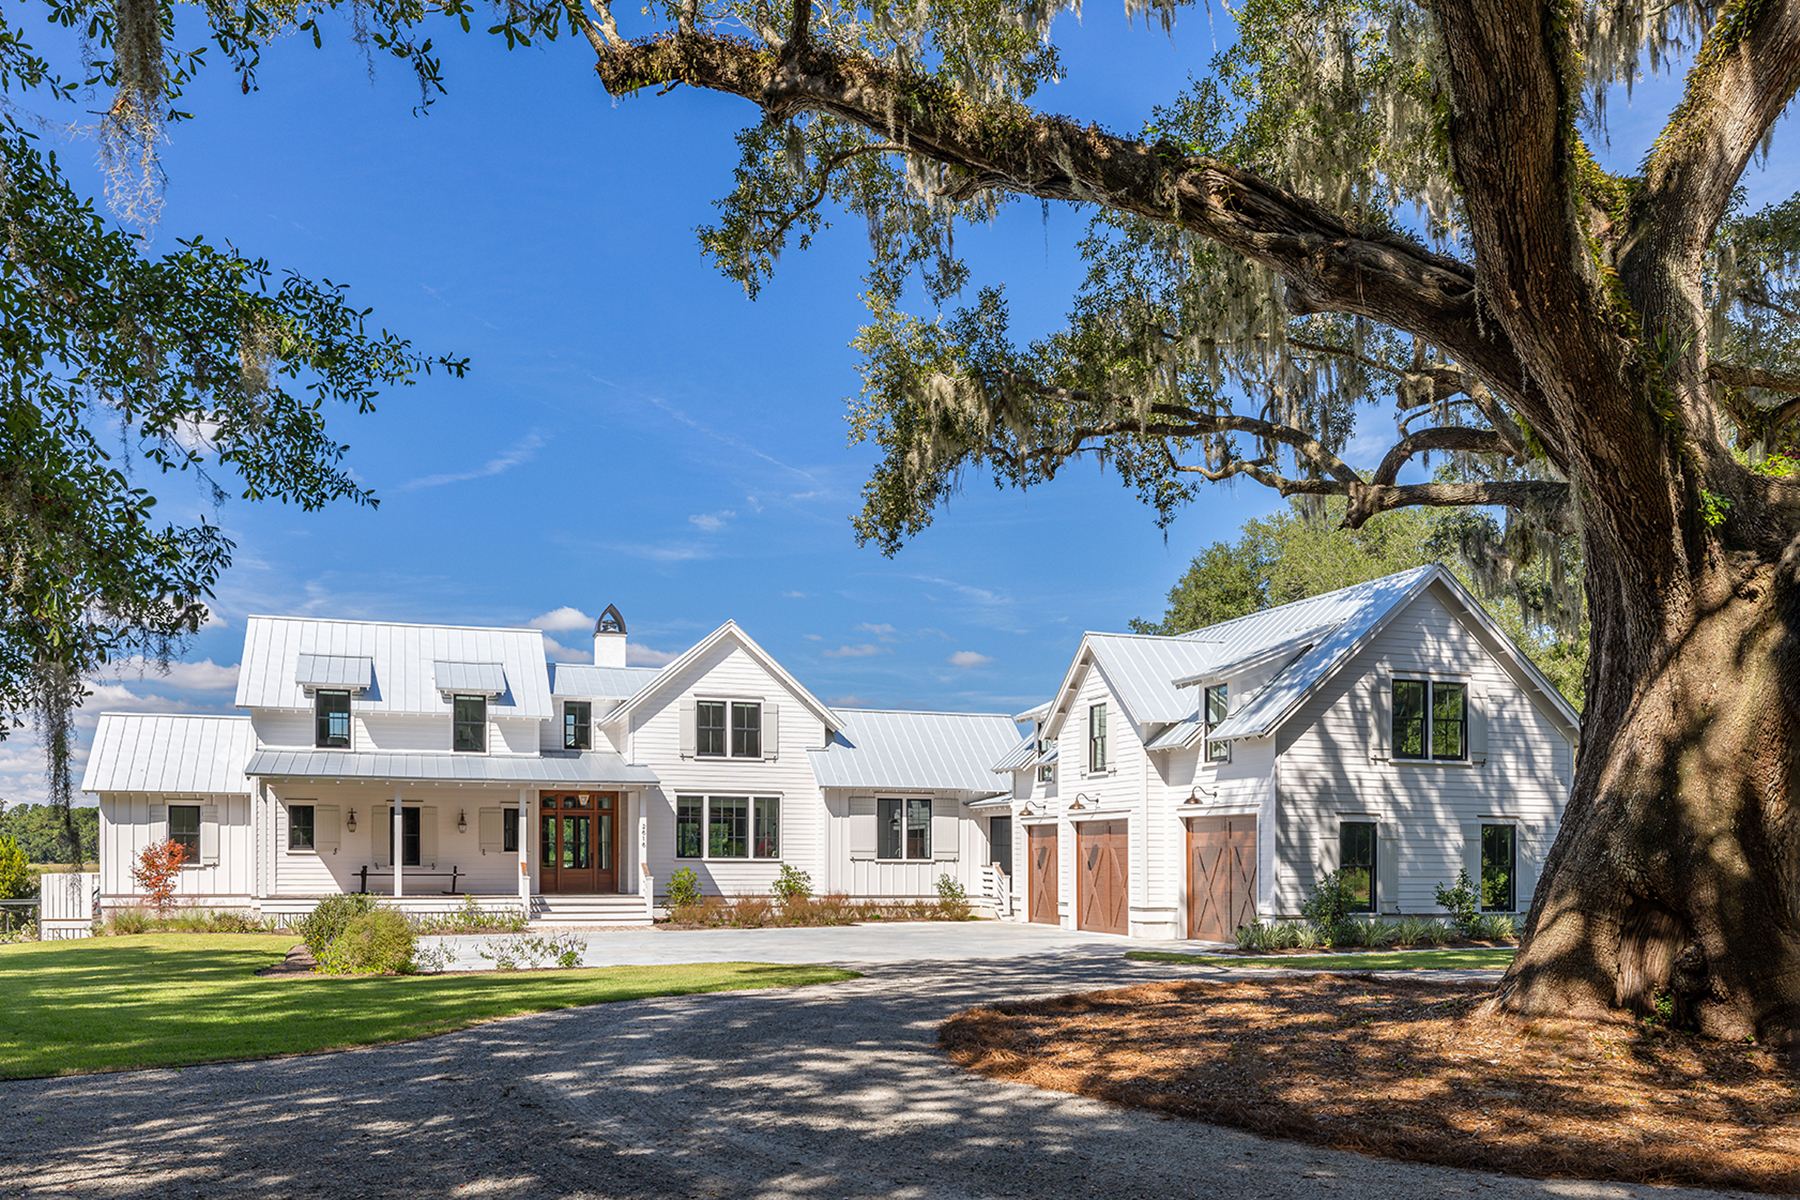 Custom Lowcountry home on Johns Island with large Grand Oak in the front